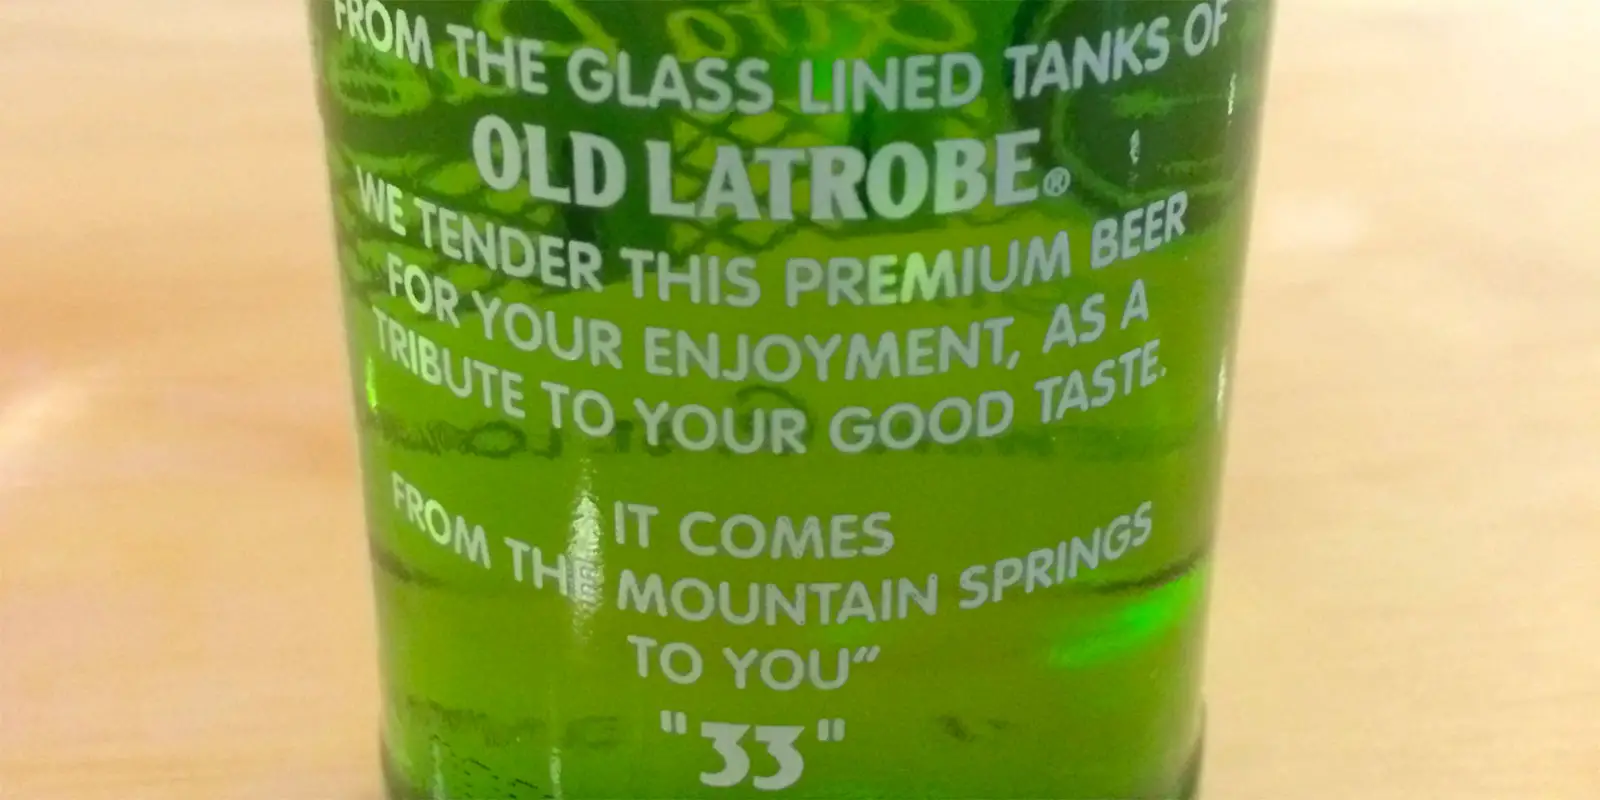 11 Theories About the Mysterious "33" On Rolling Rock Bottles - 11 Points